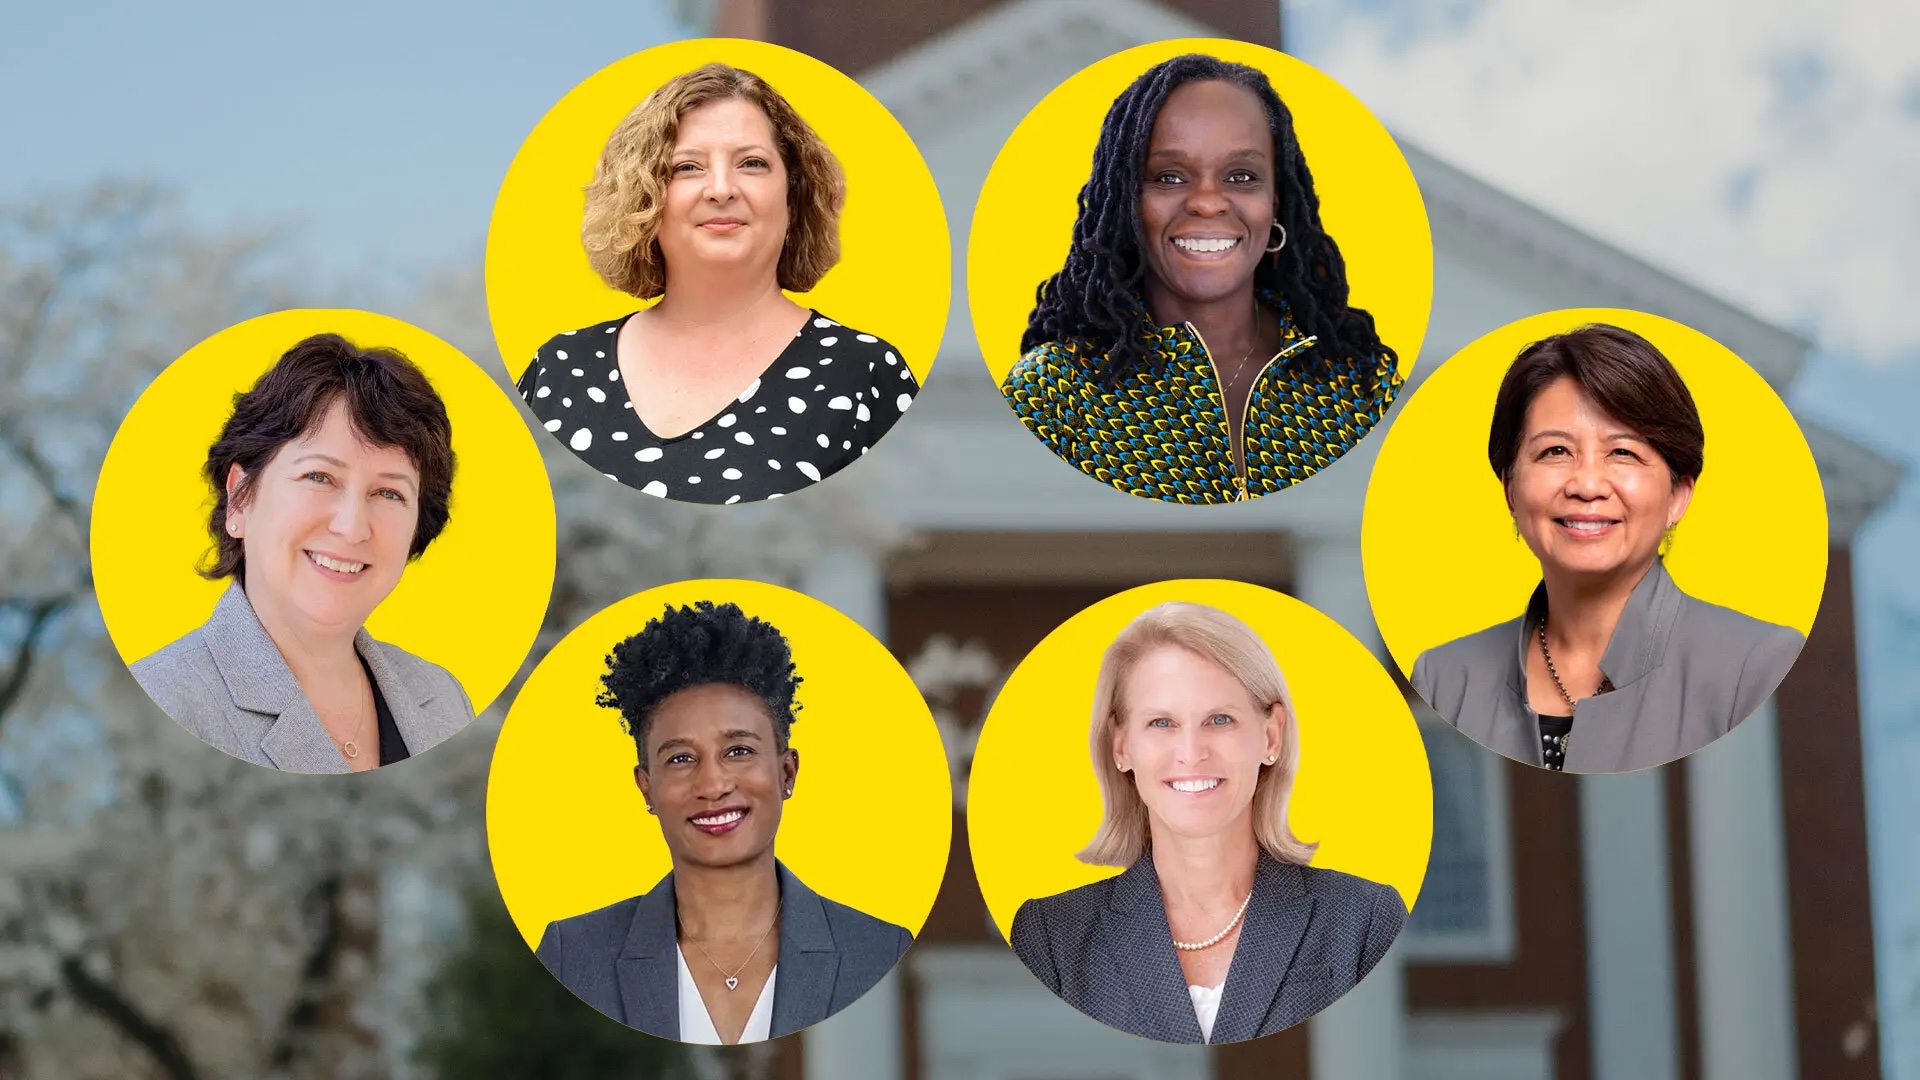 Five of 15 school and college deans at UMD are women, a figure that surpasses the 22% percent of research university leadership positions that are held by women nationwide. Collage by Valerie Morgan